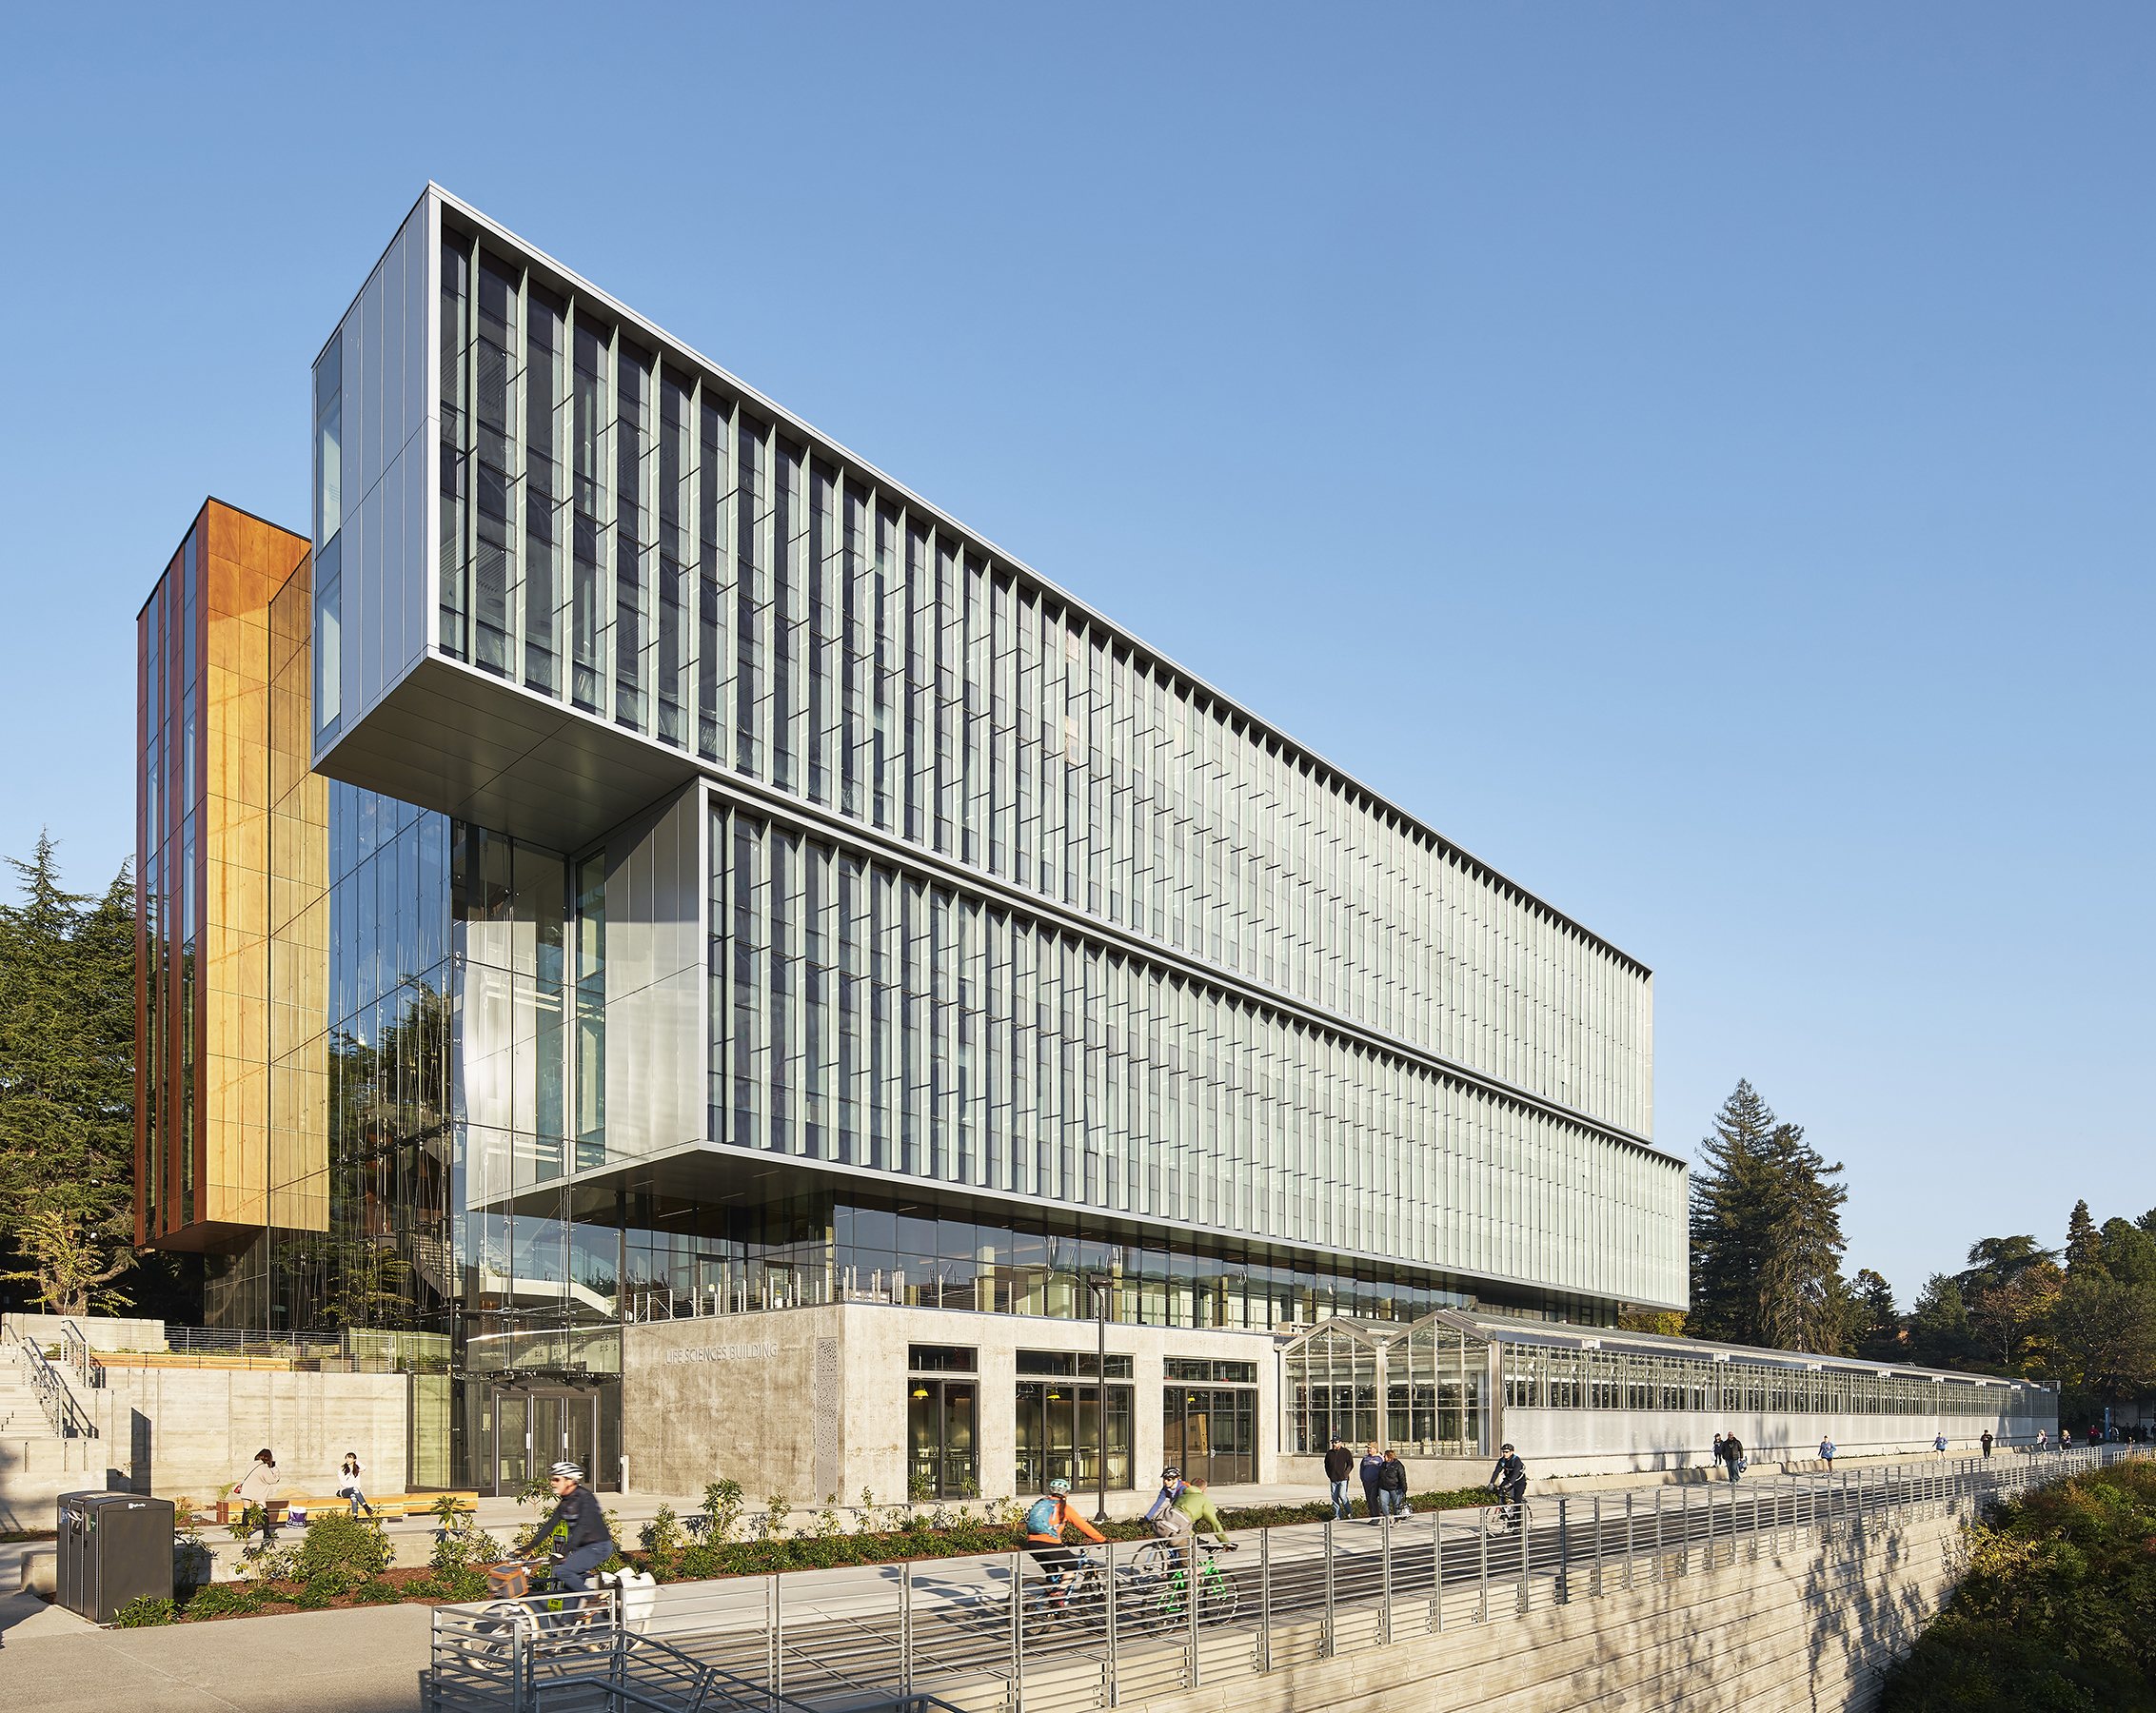 View of the south facade of UW Life Sciences Building with people biking and walking by on the Burke Gilman trail.